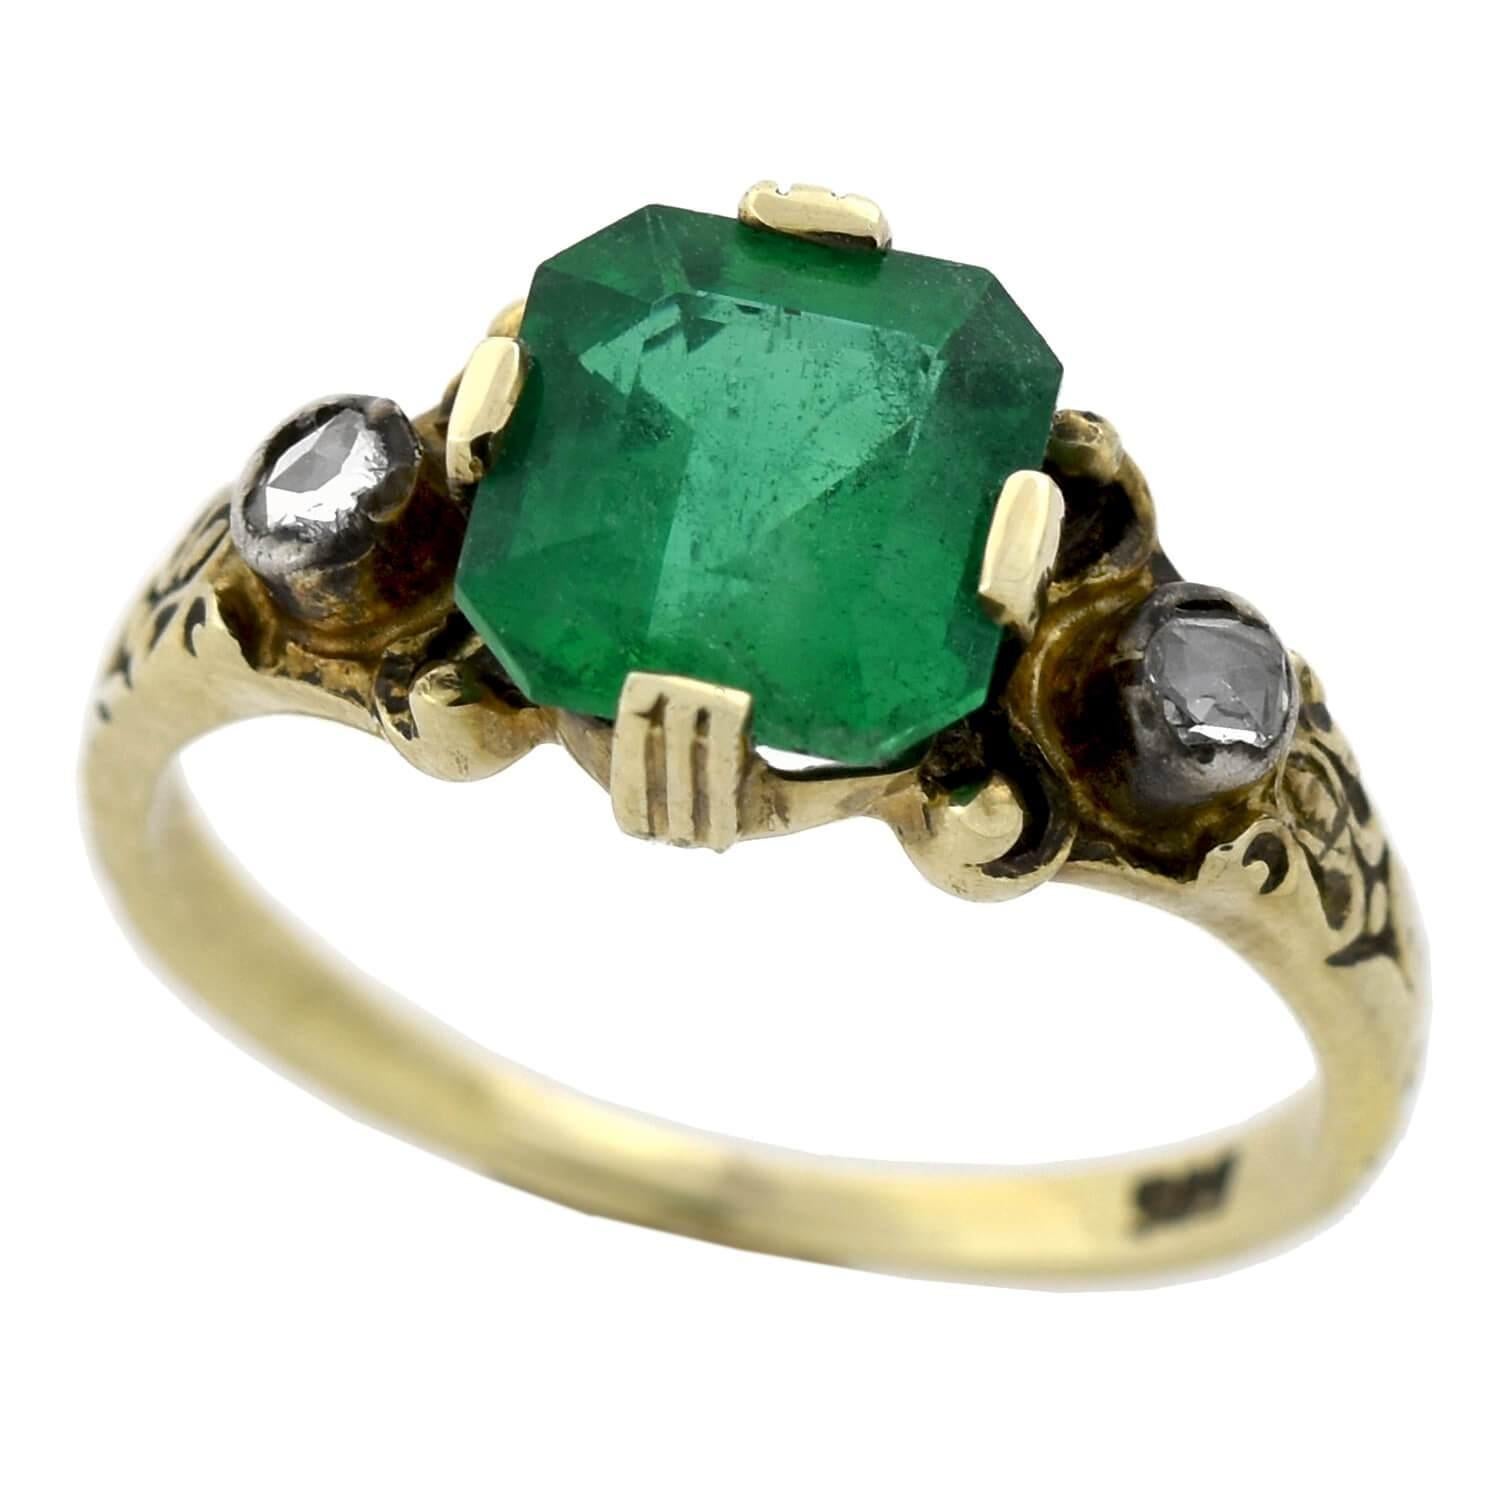 A stunning emerald and diamond ring from the Edwardian (ca1915) era! This incredible piece is crafted in 14kt yellow gold with sterling silver accents and adorns a fabulous Colombian emerald at the center. The Emerald Square Cut gemstone weighs